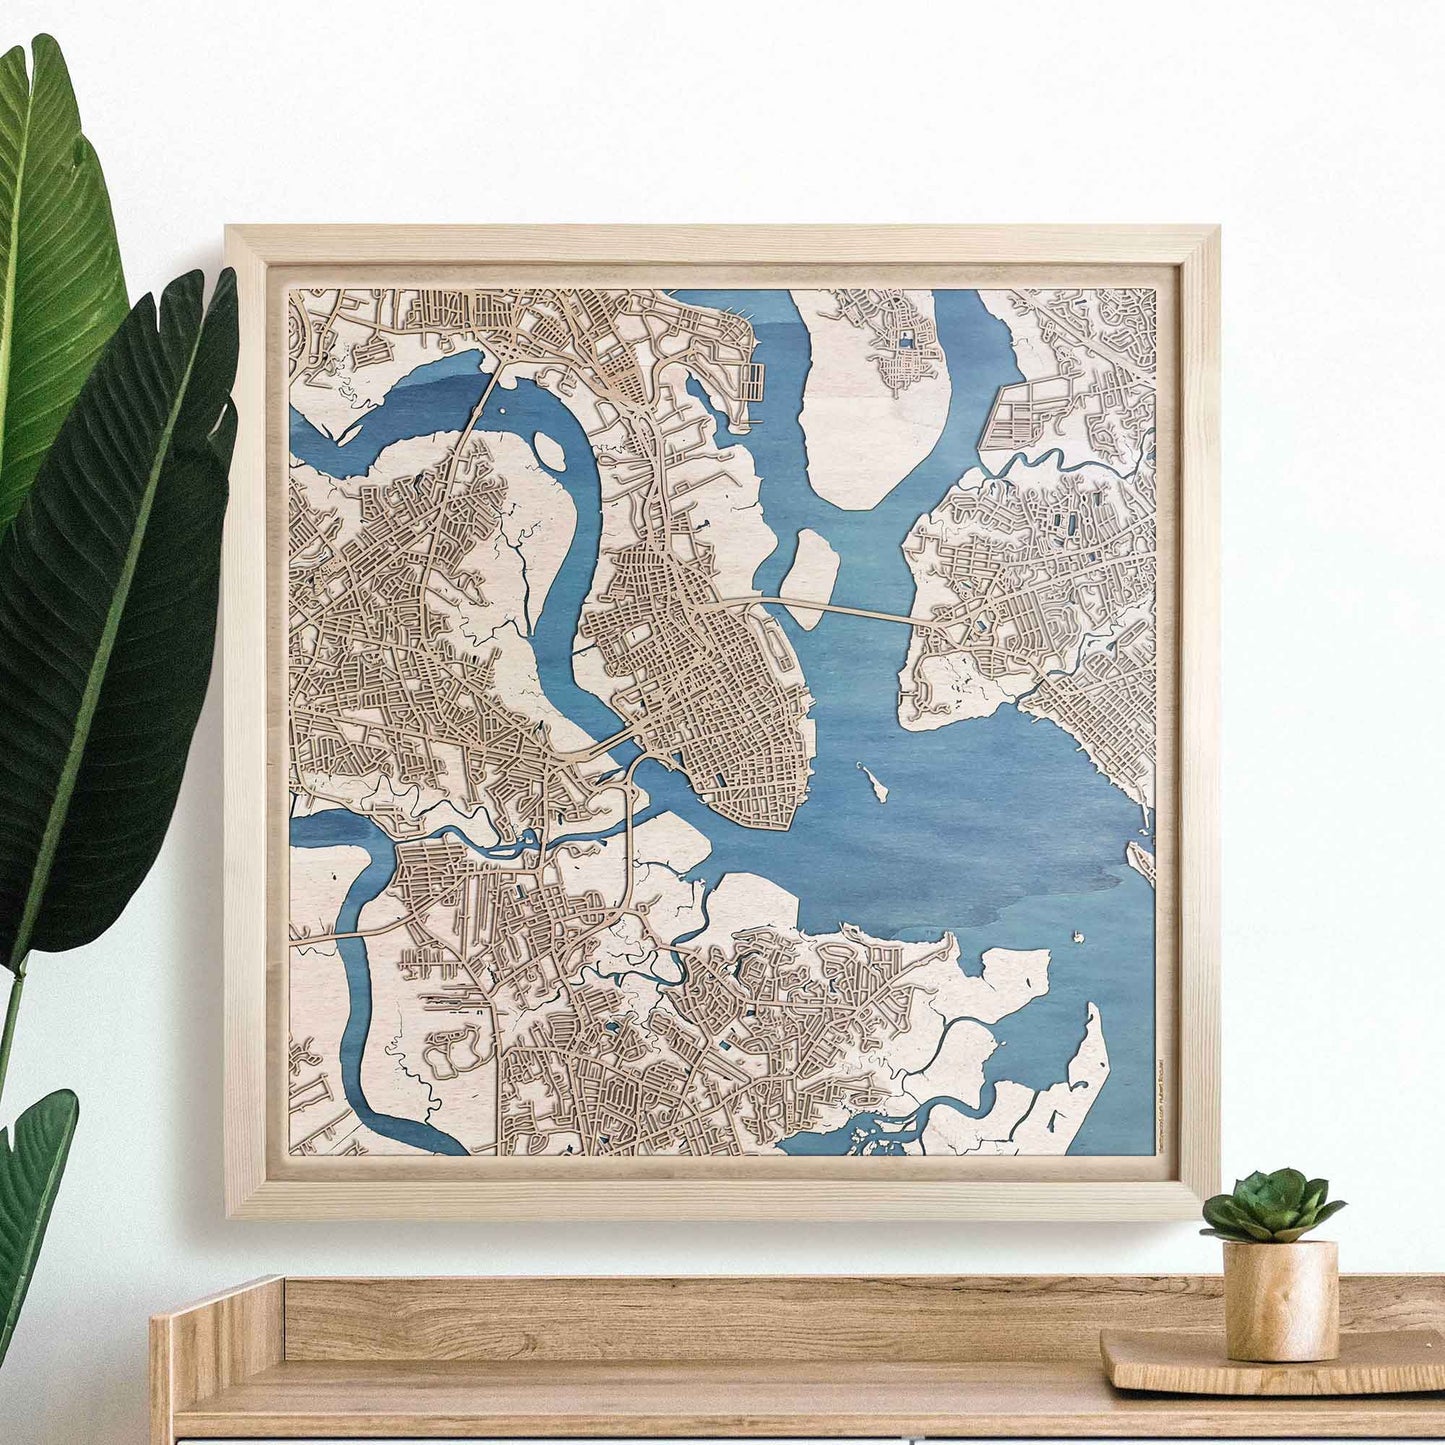 Charleston Wooden Map by CityWood - Custom Wood Map Art - Unique Laser Cut Engraved - Anniversary Gift